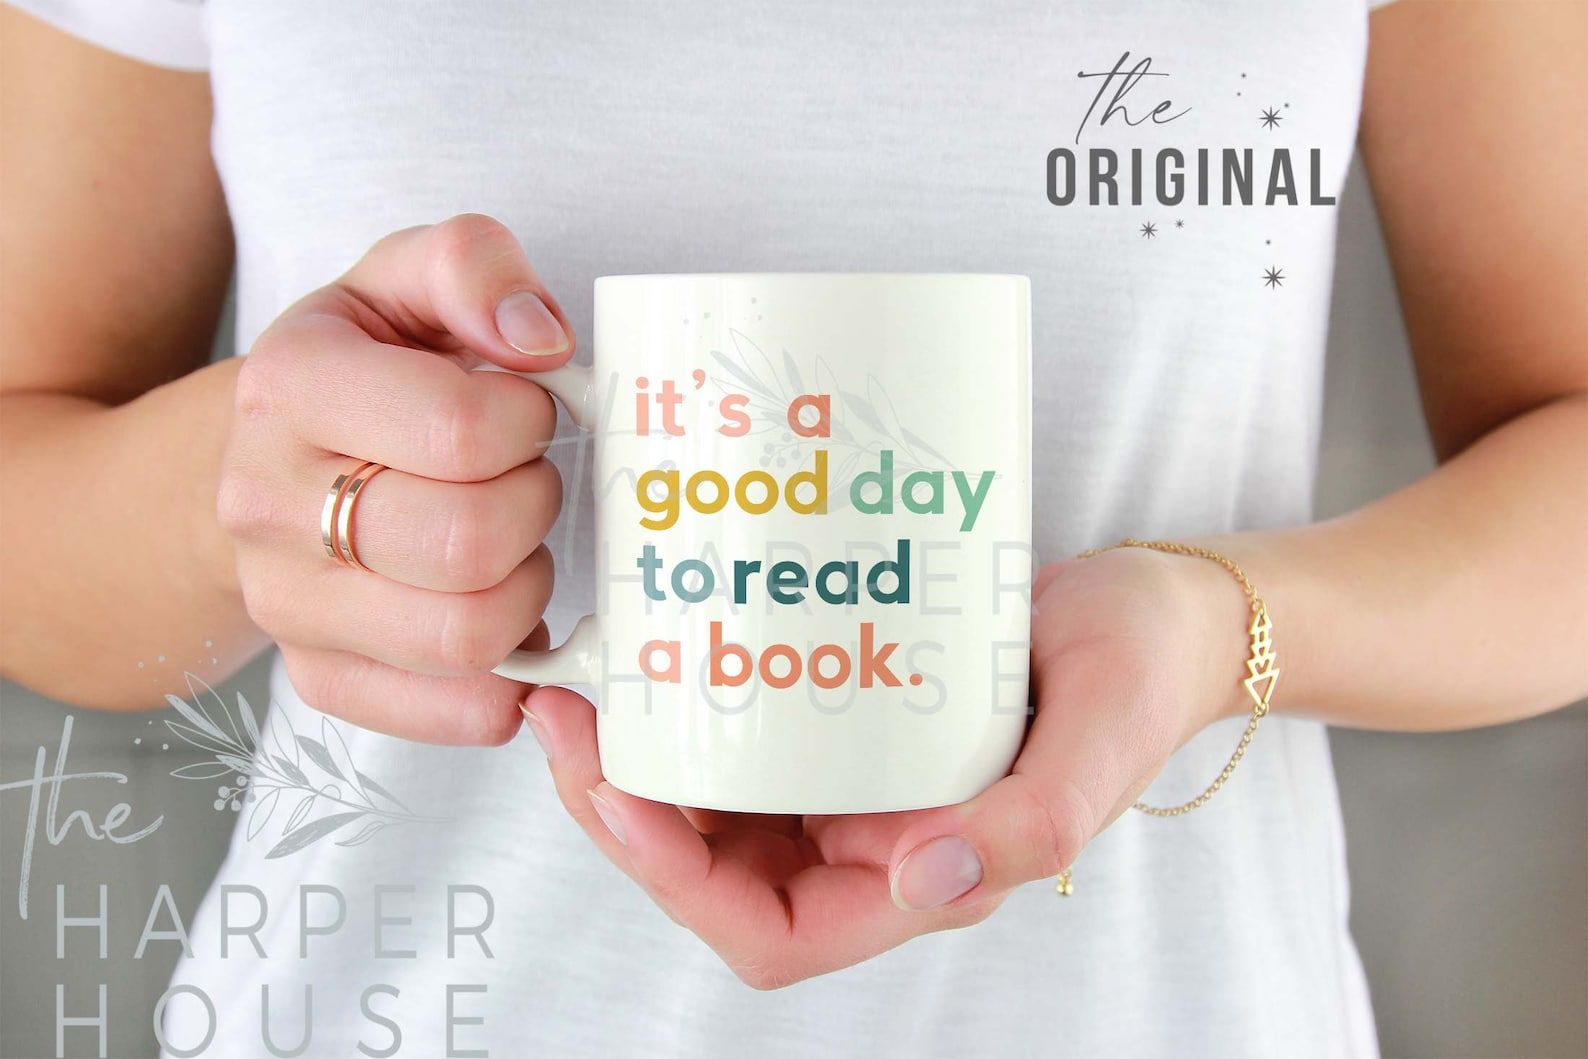 A white mug with pastel text that reads "It's a good day to read a book."